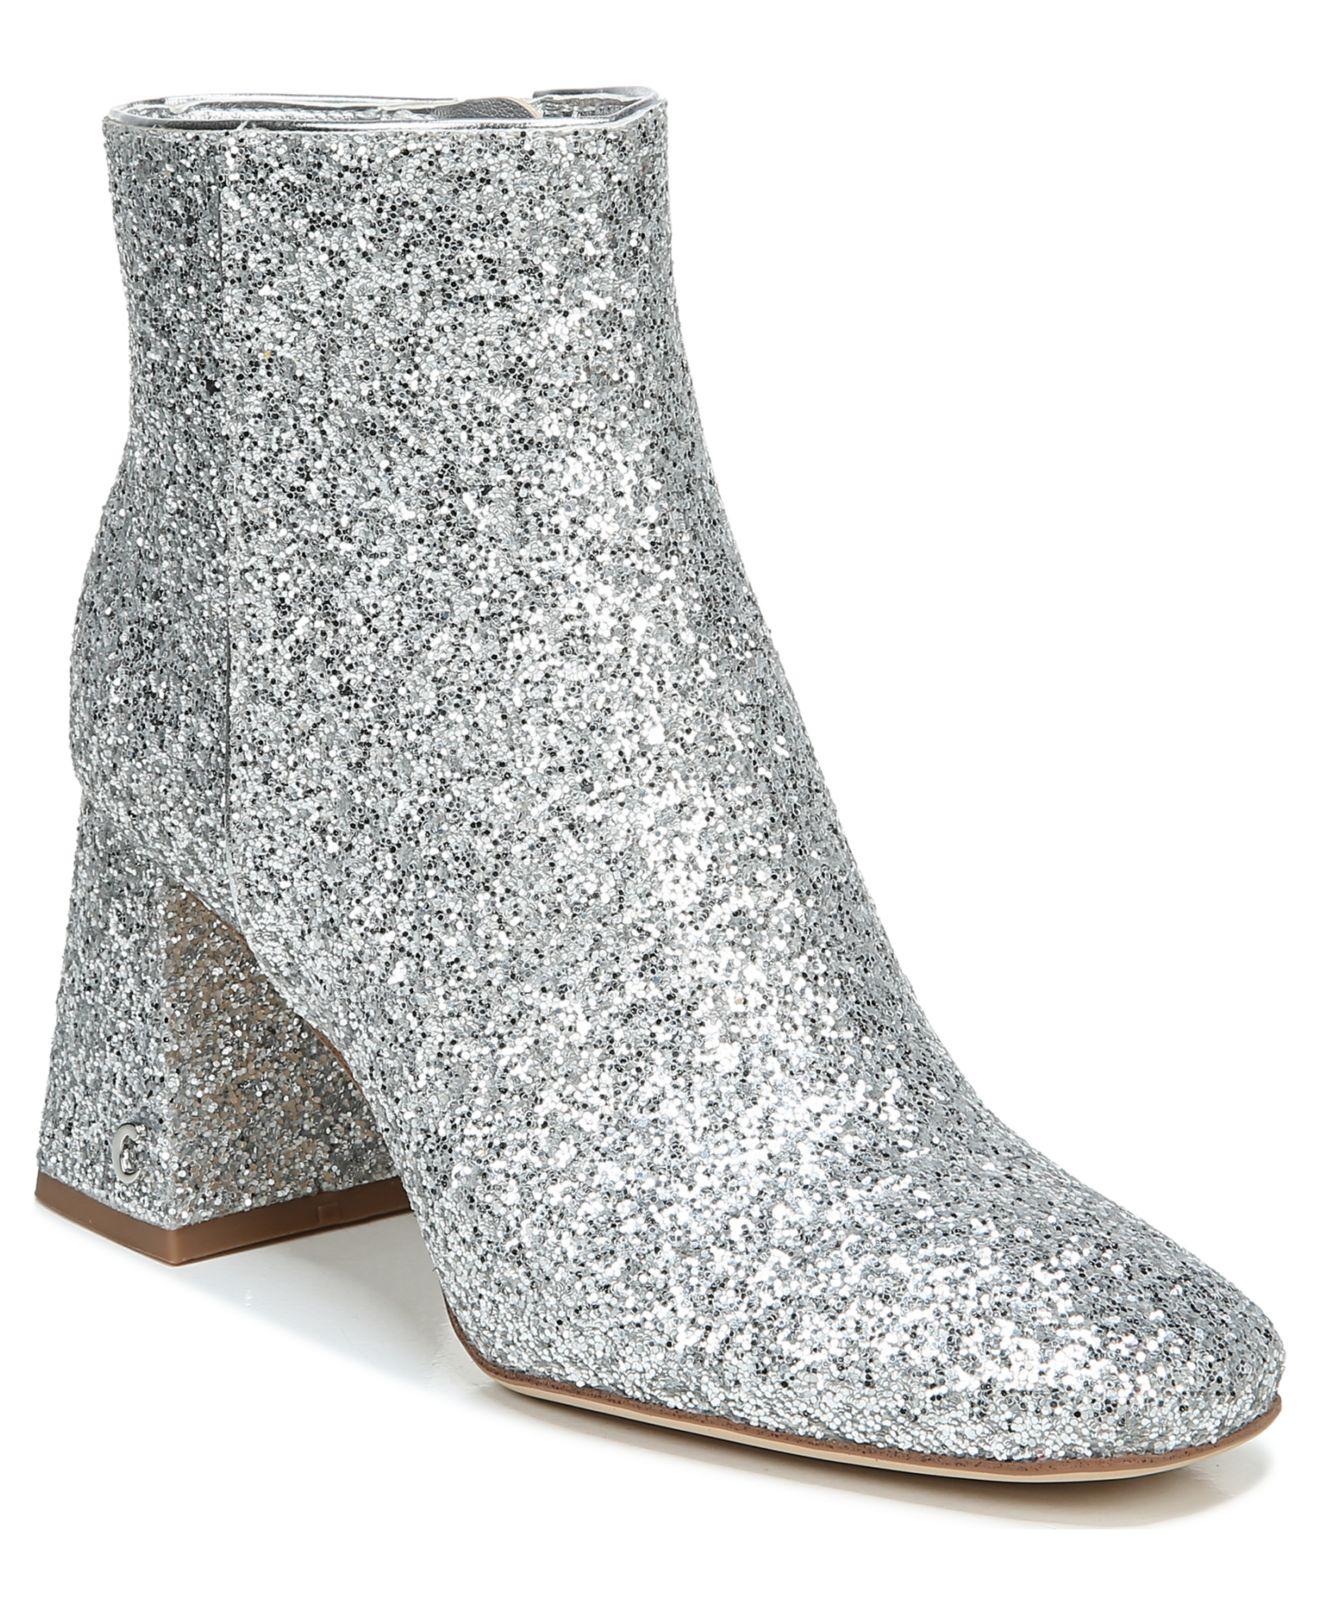 Circus by Sam Edelman Kate Square-toe Booties in Soft Silver Glitter ...